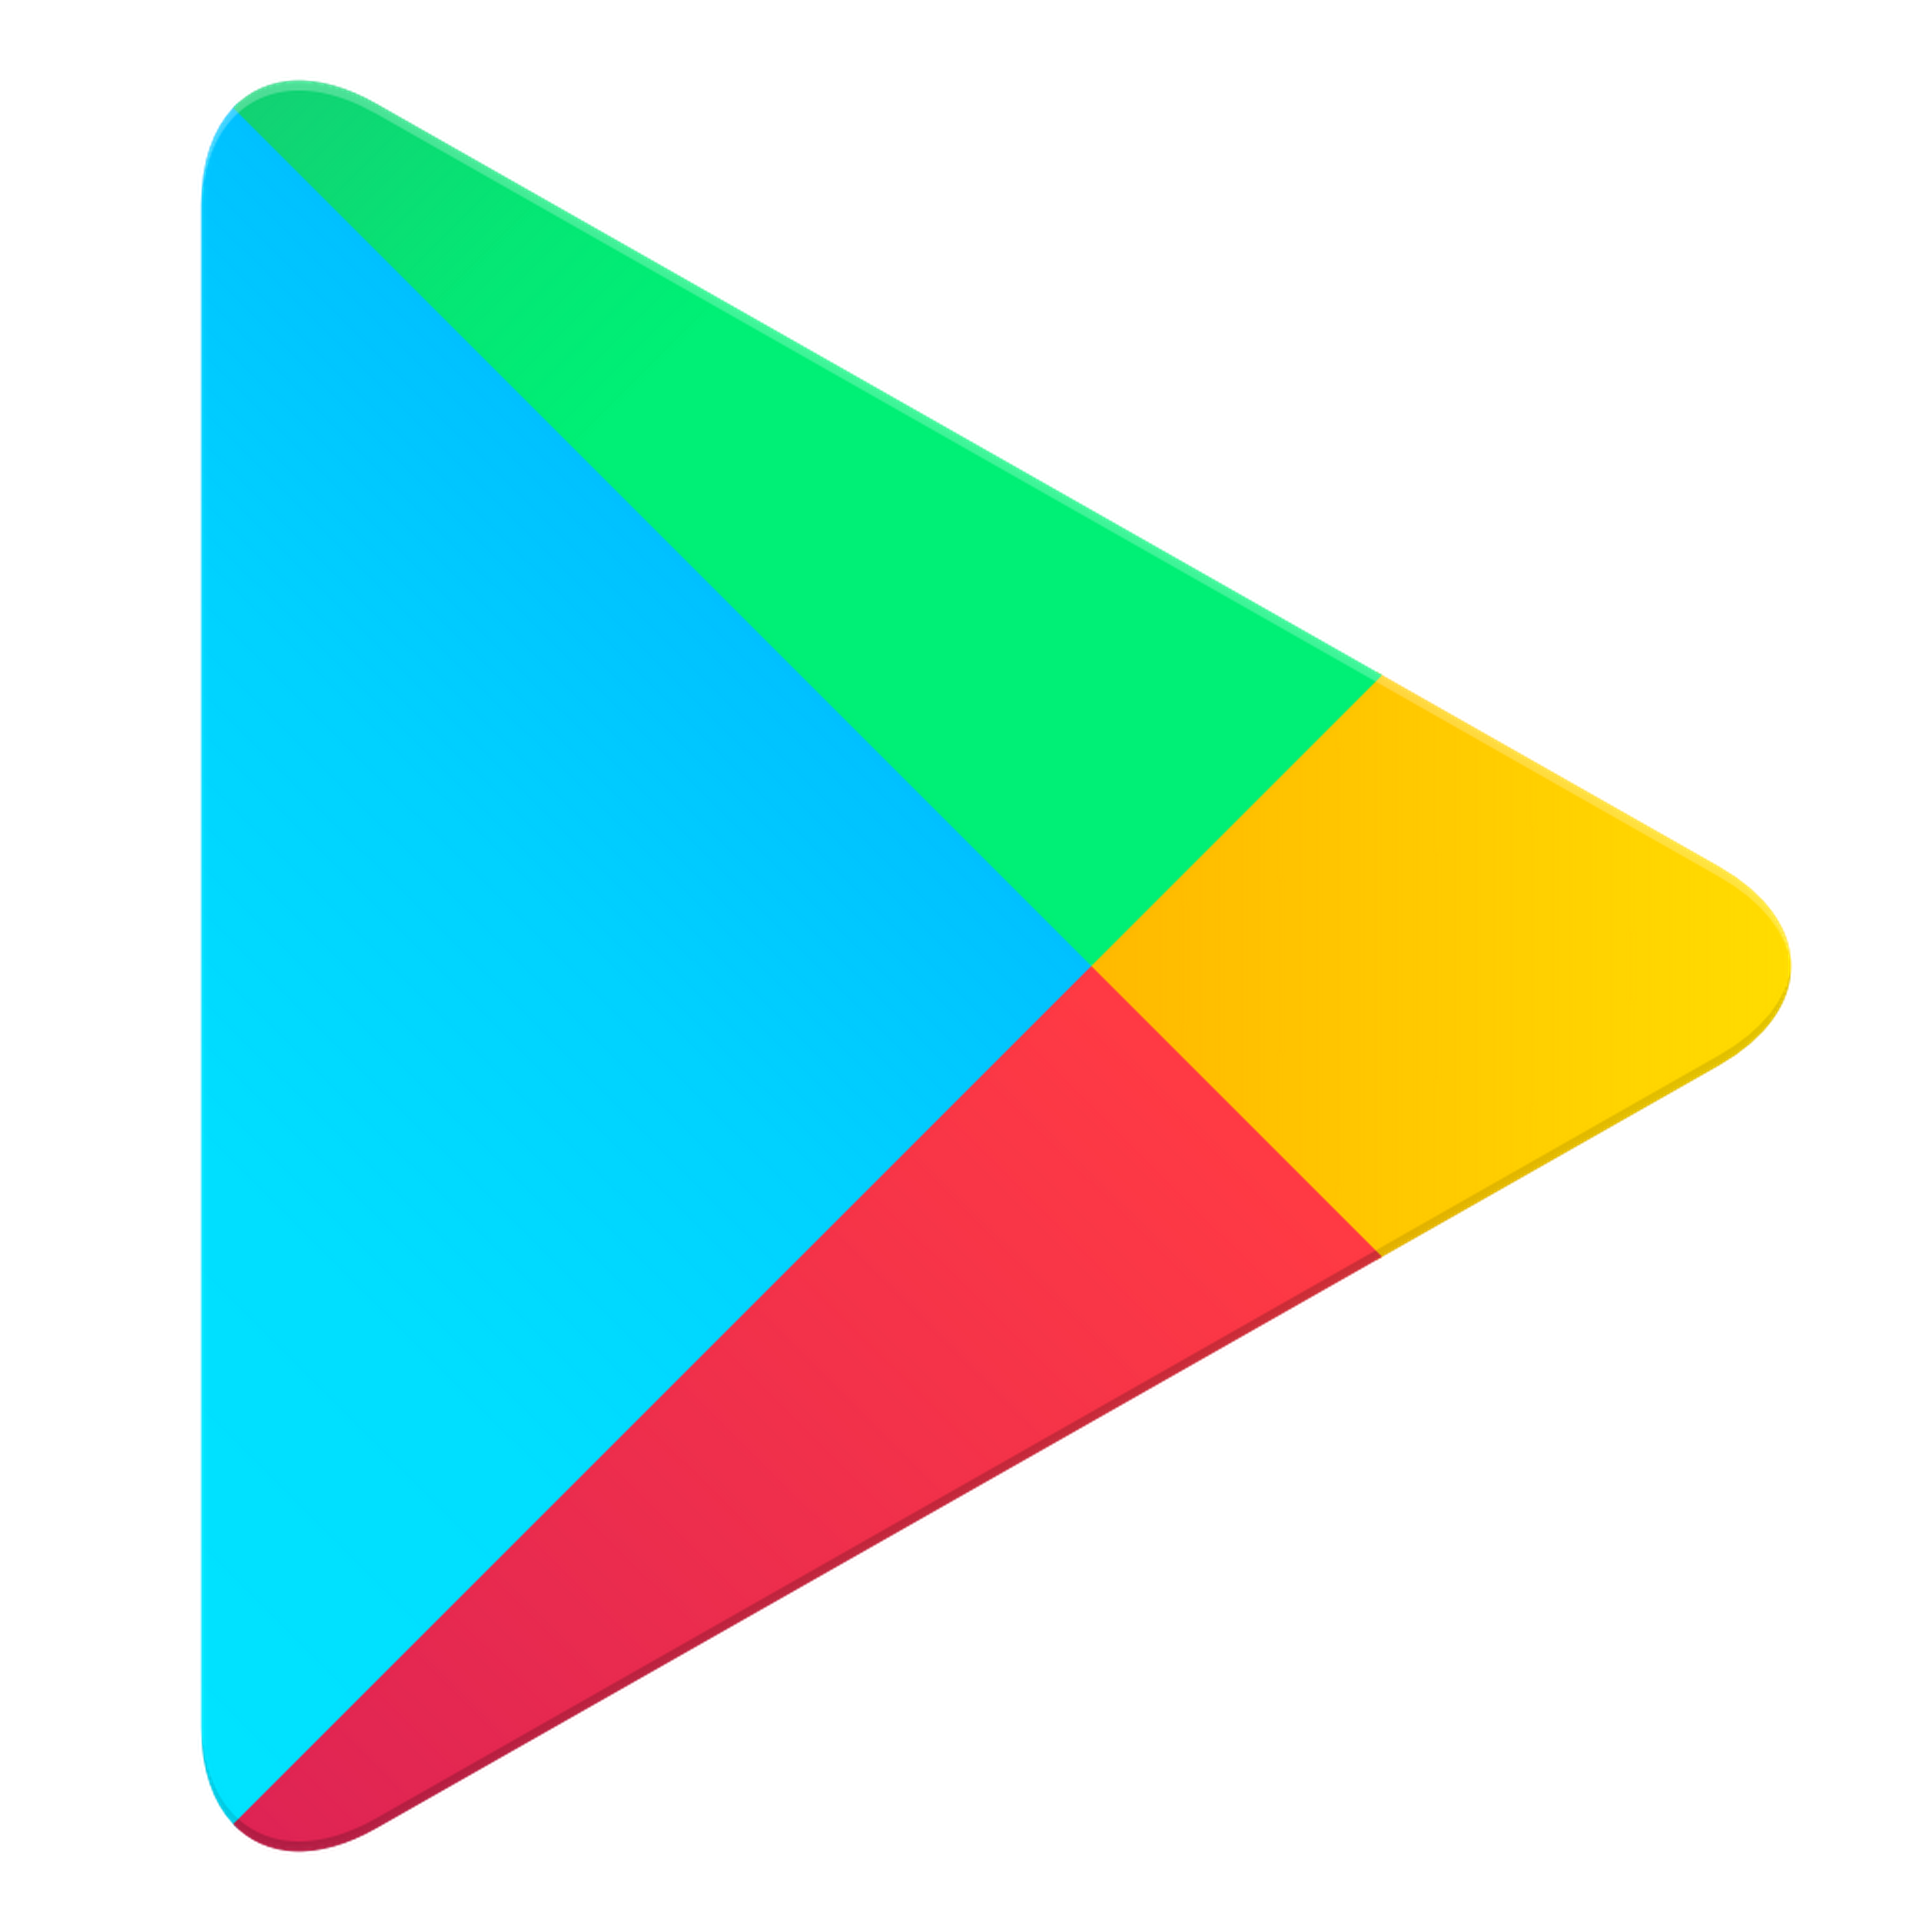 playstore icon